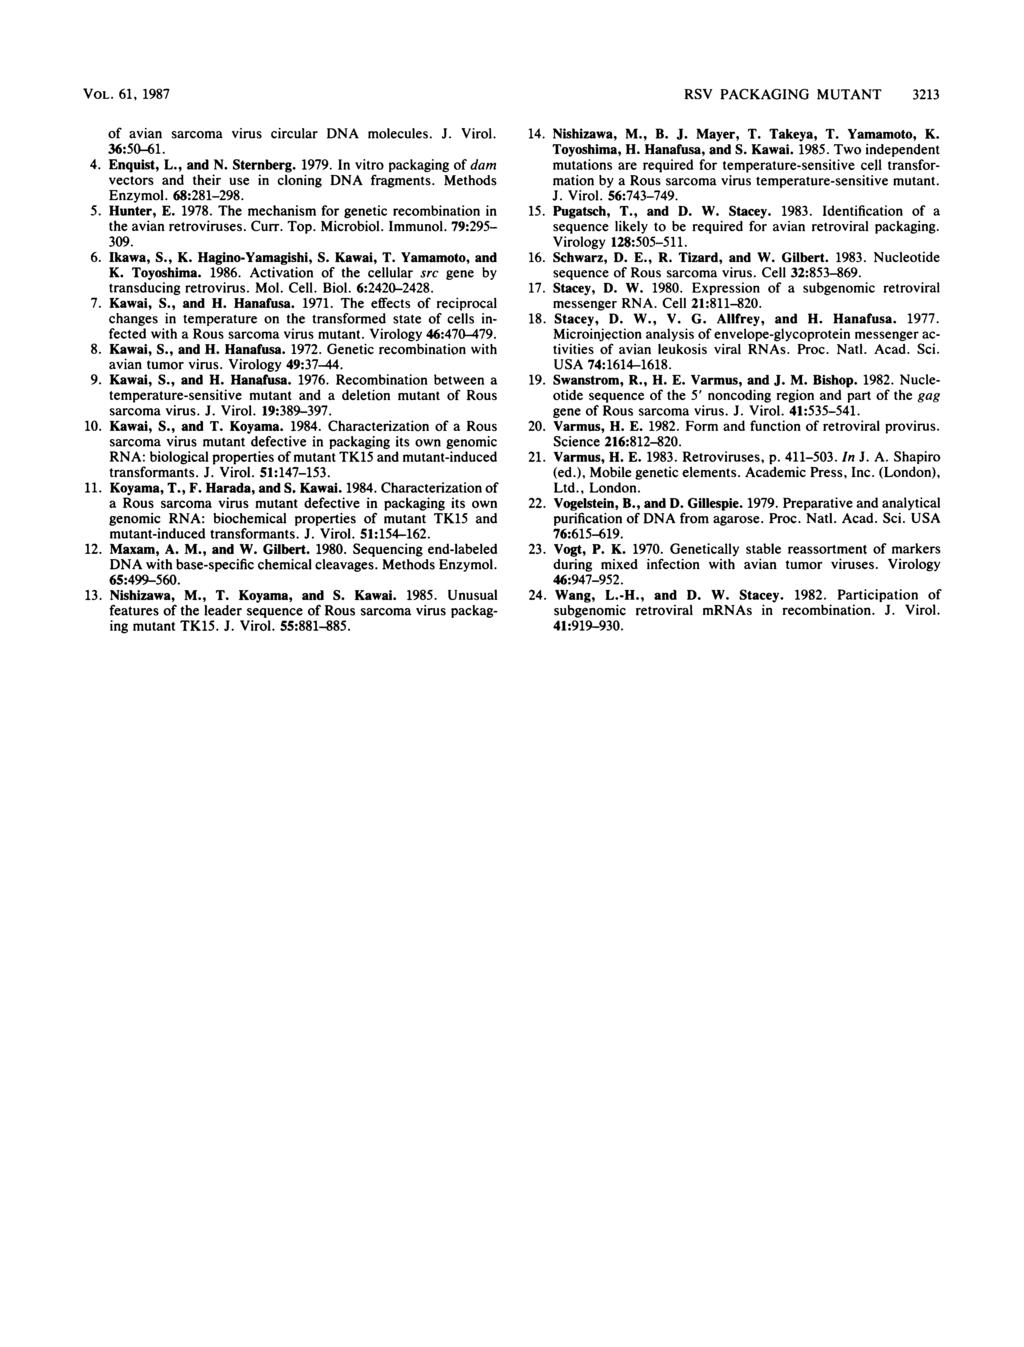 VOL. 61, 1987 of avian sarcoma virus circular DNA molecules. J. Virol. 36:50-61. 4. Enquist, L., and N. Sternberg. 1979. In vitro packaging of dam vectors and their use in cloning DNA fragments.